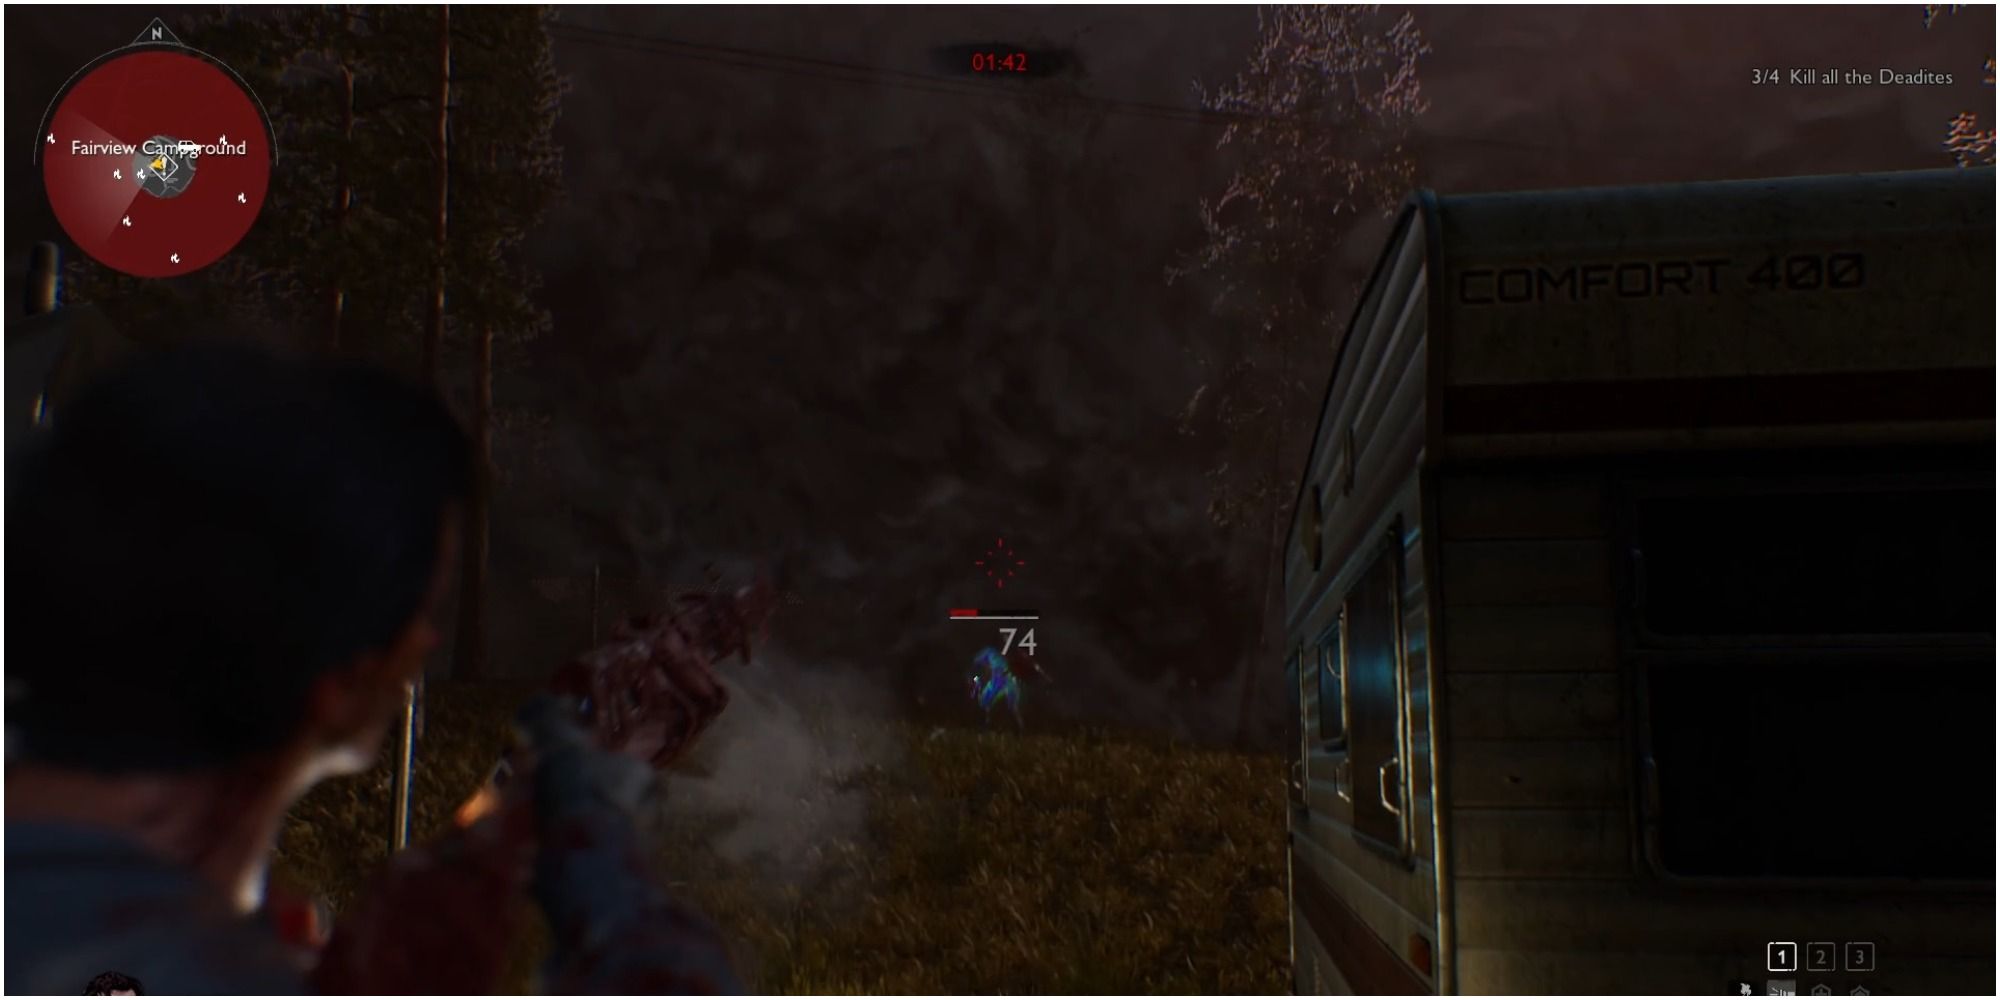 Evil Dead The Game Third Mission Hitting The Final Boss With A Rifle Shot